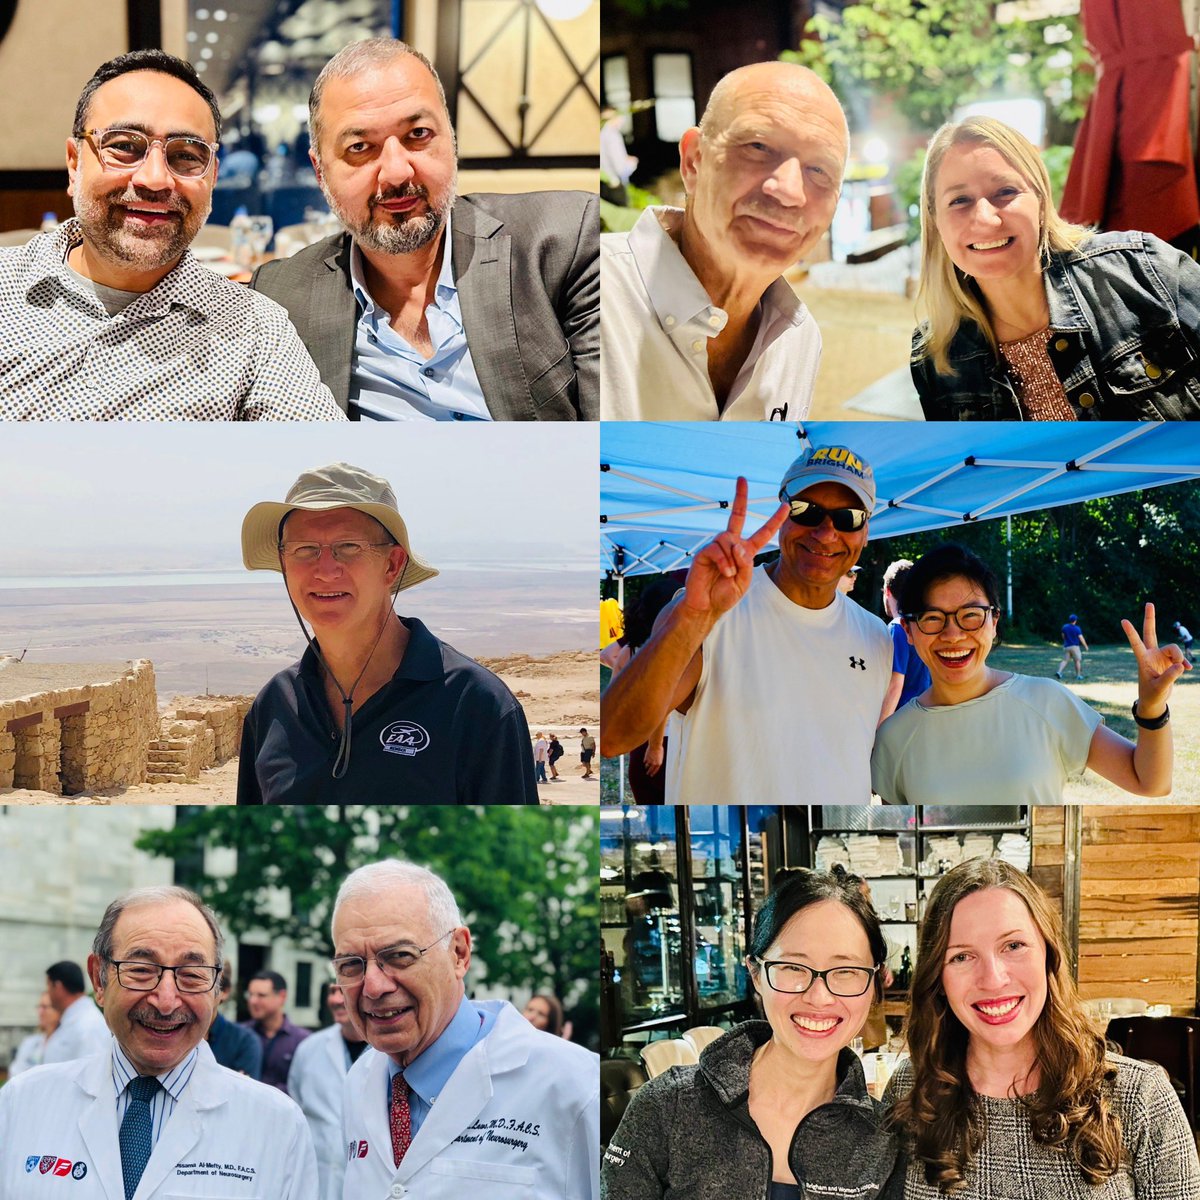 #gratefulfor and privileged to work with so many extraordinary @BWHNeurosurgery partners! @BrainAVMsurgeon @DanielleSarnoMD @gliomaregistry @Michael32154260 @rees_cosgrove